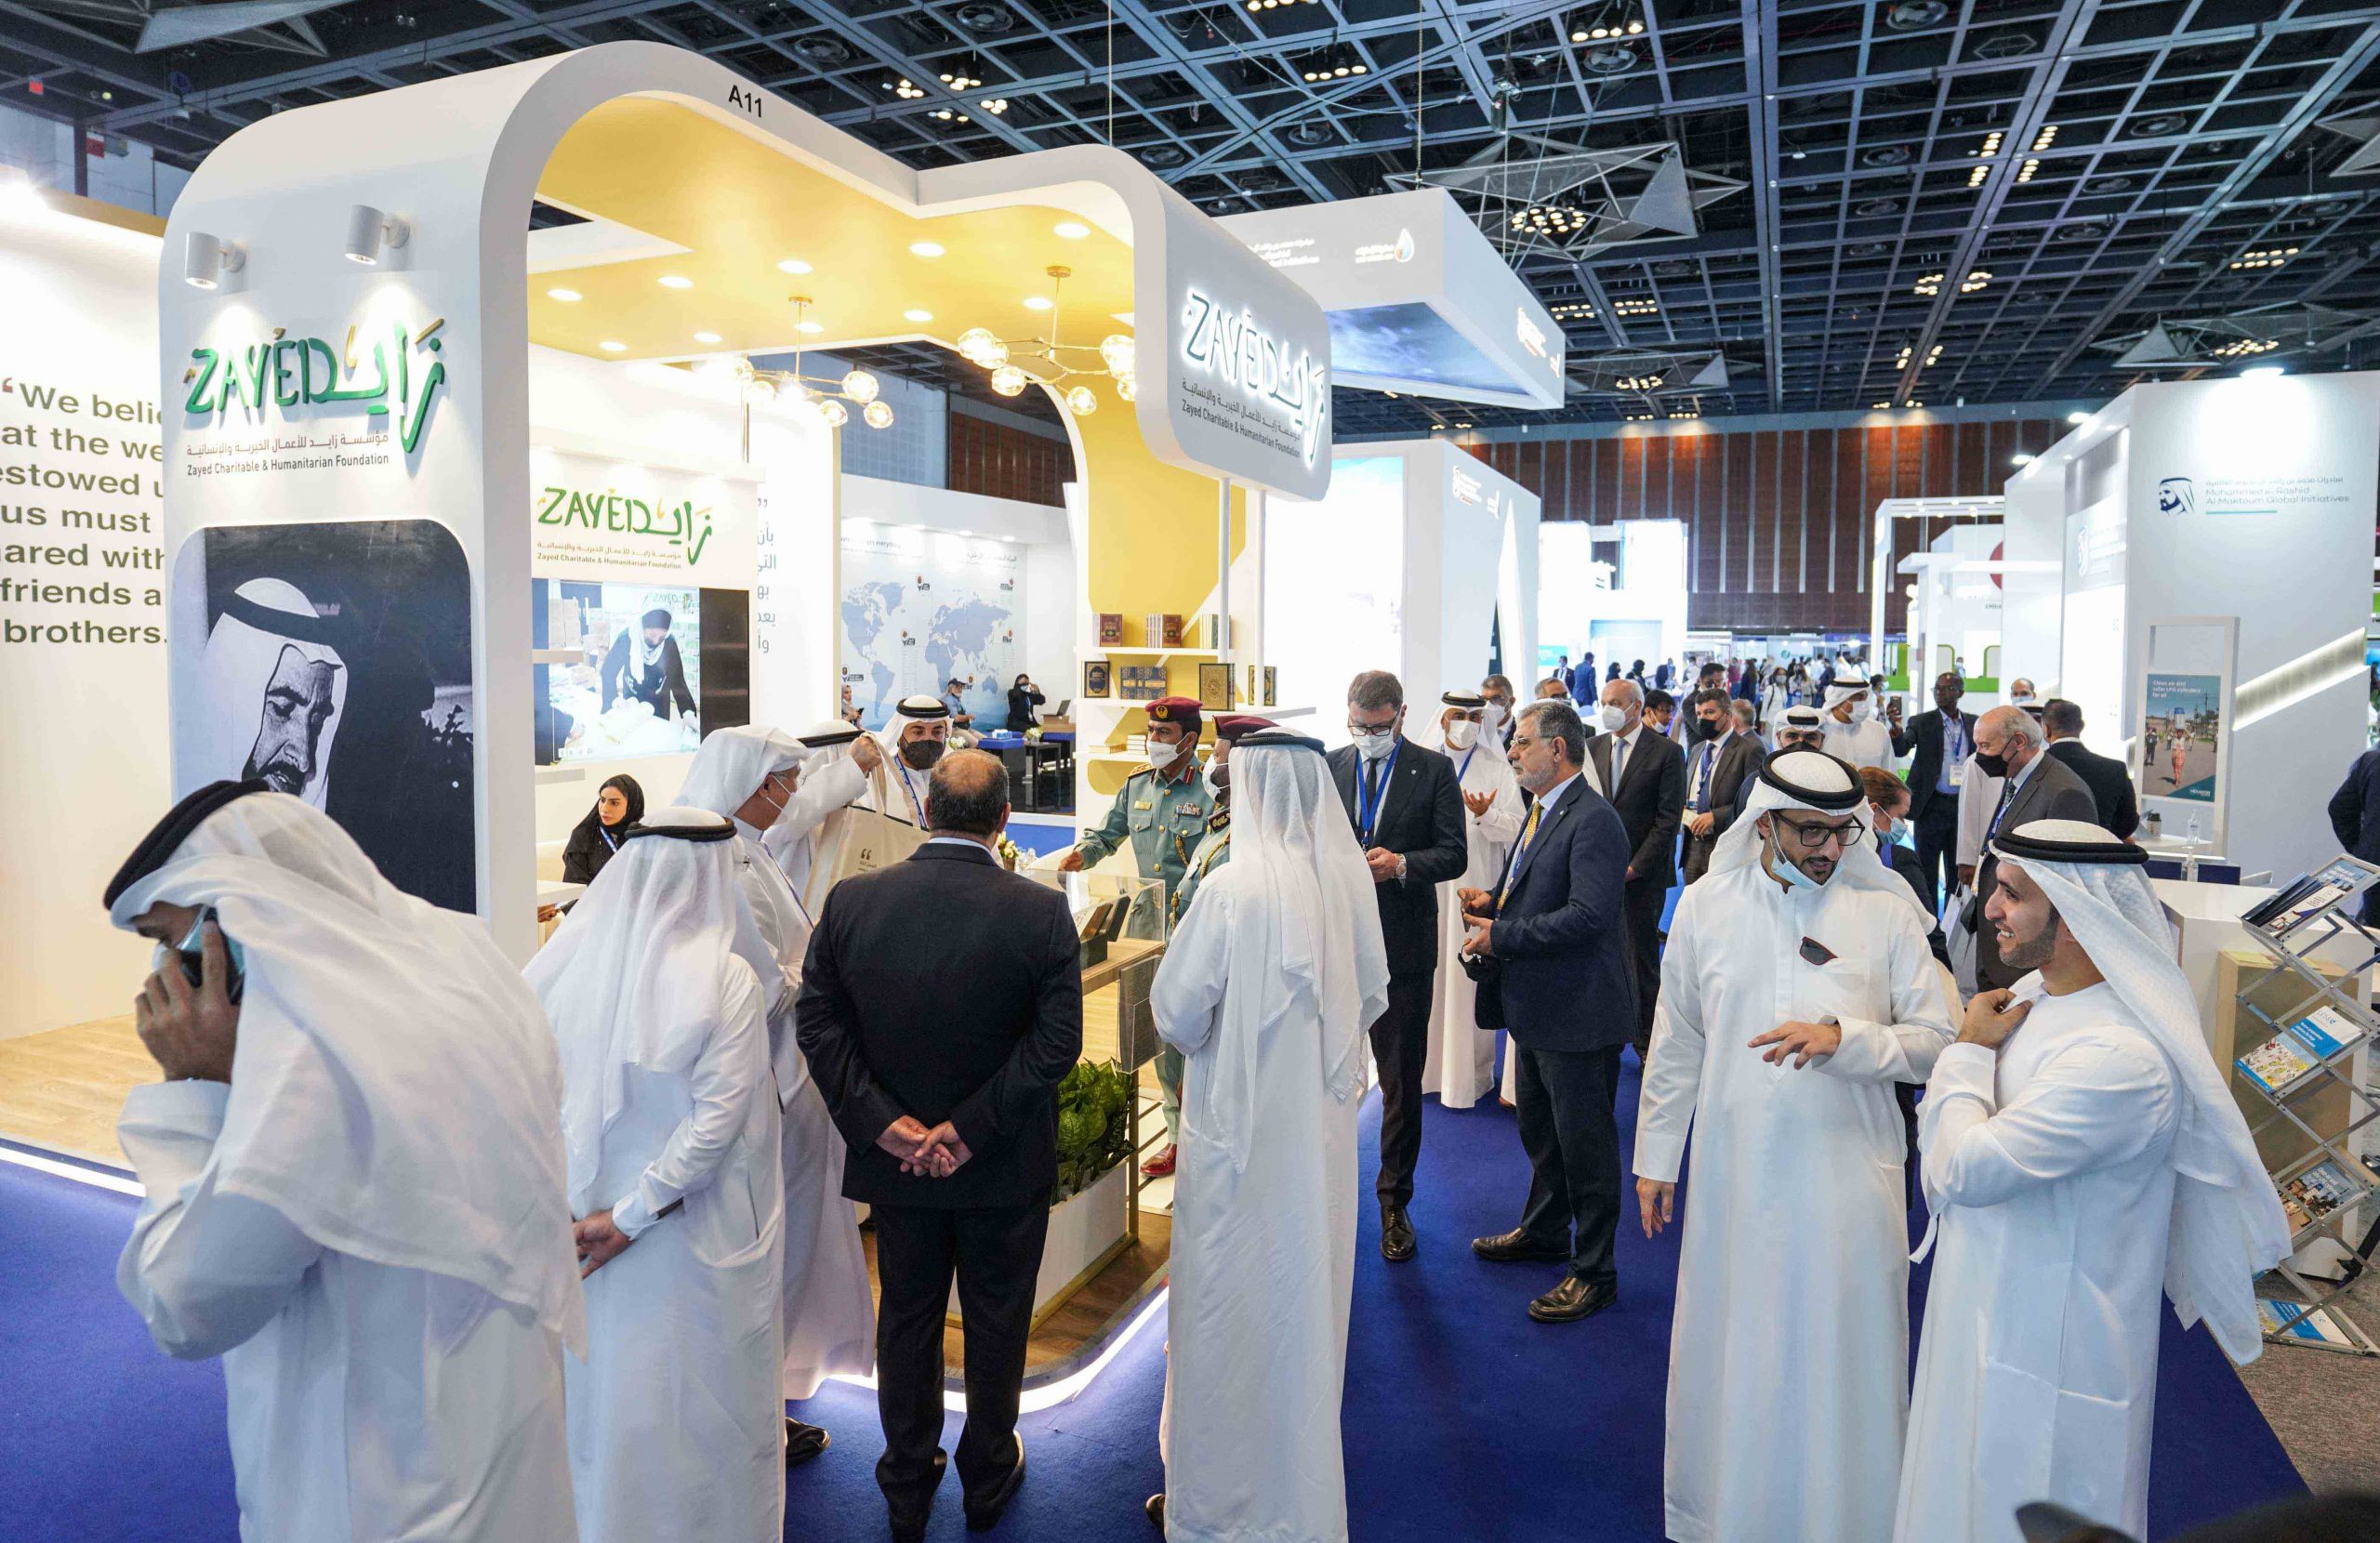 DIHAD Conference and Exhibition all set to commence next week with more than 6,000 participants from 84 countries